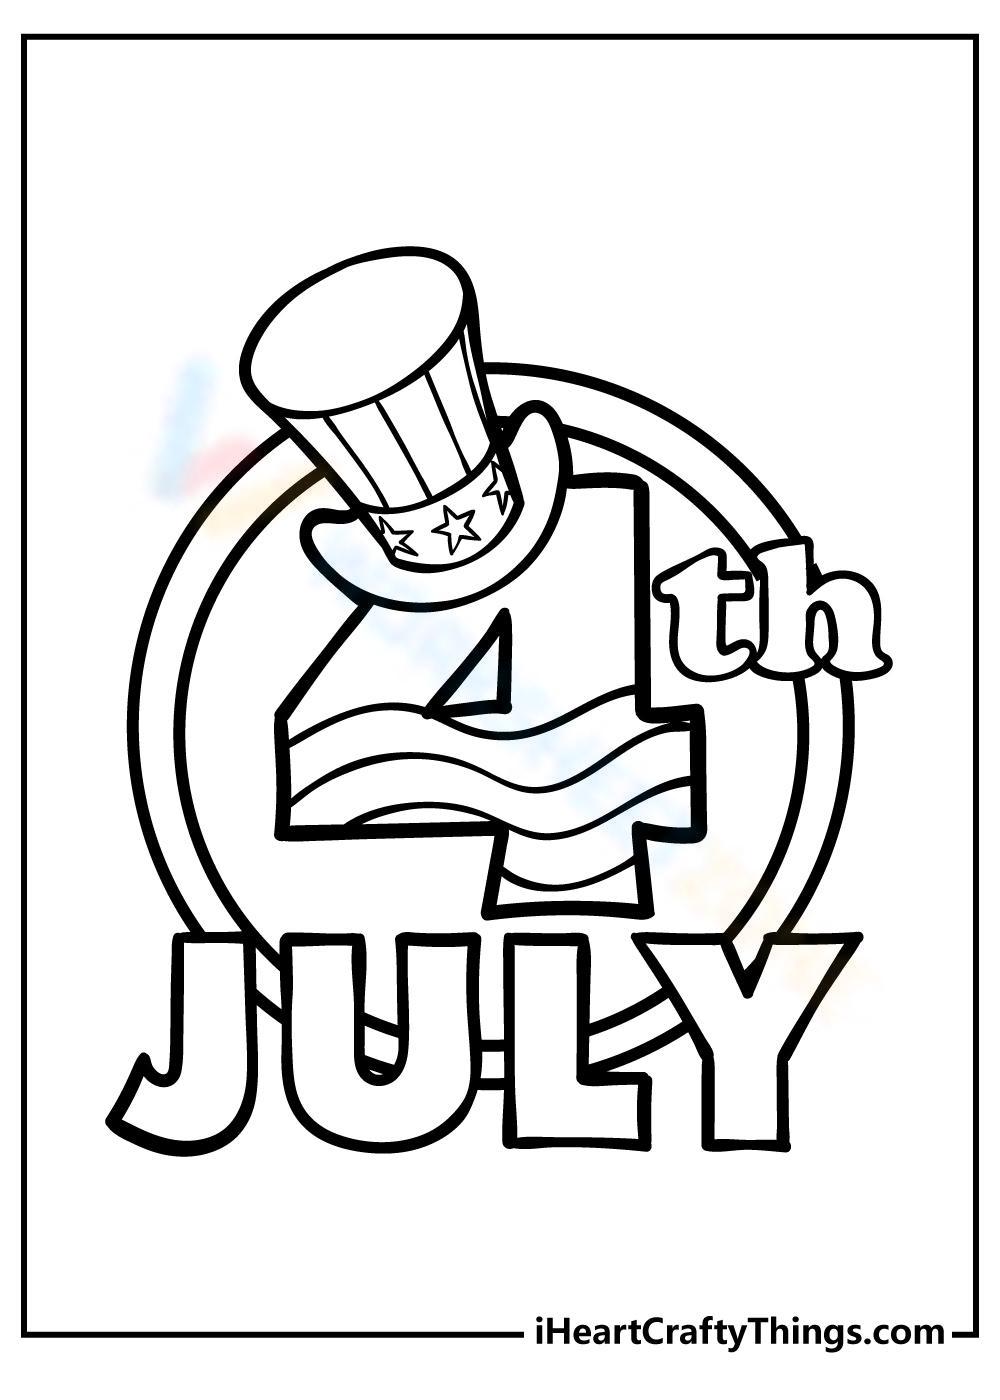 Celebrate Freedom with 4th of July: 180+ Free Coloring Pages 107